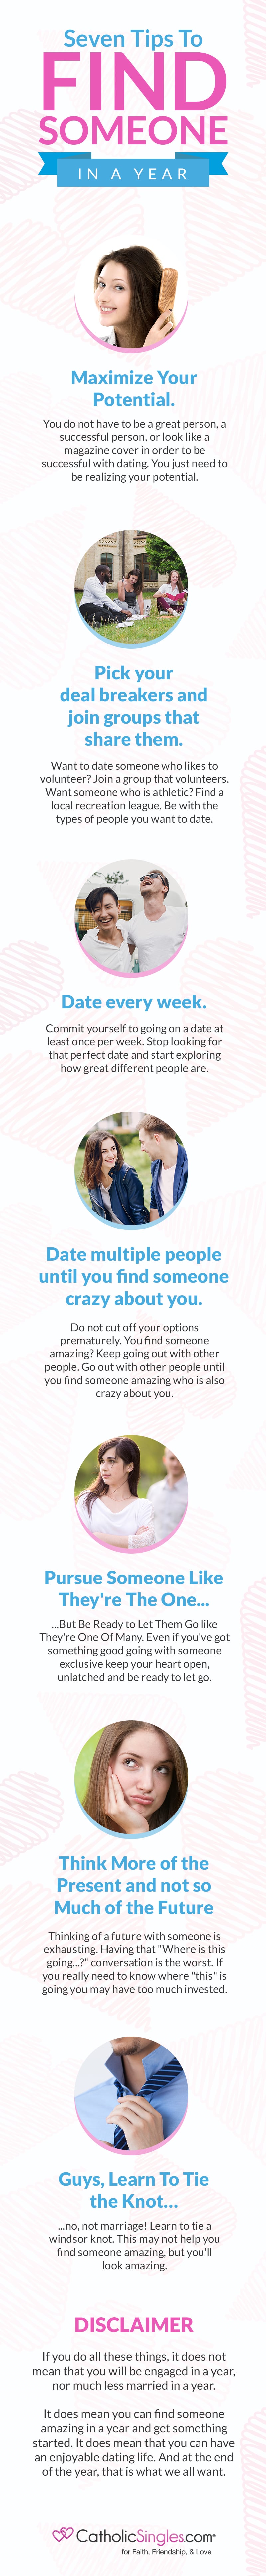 7 tips to find someone in a year